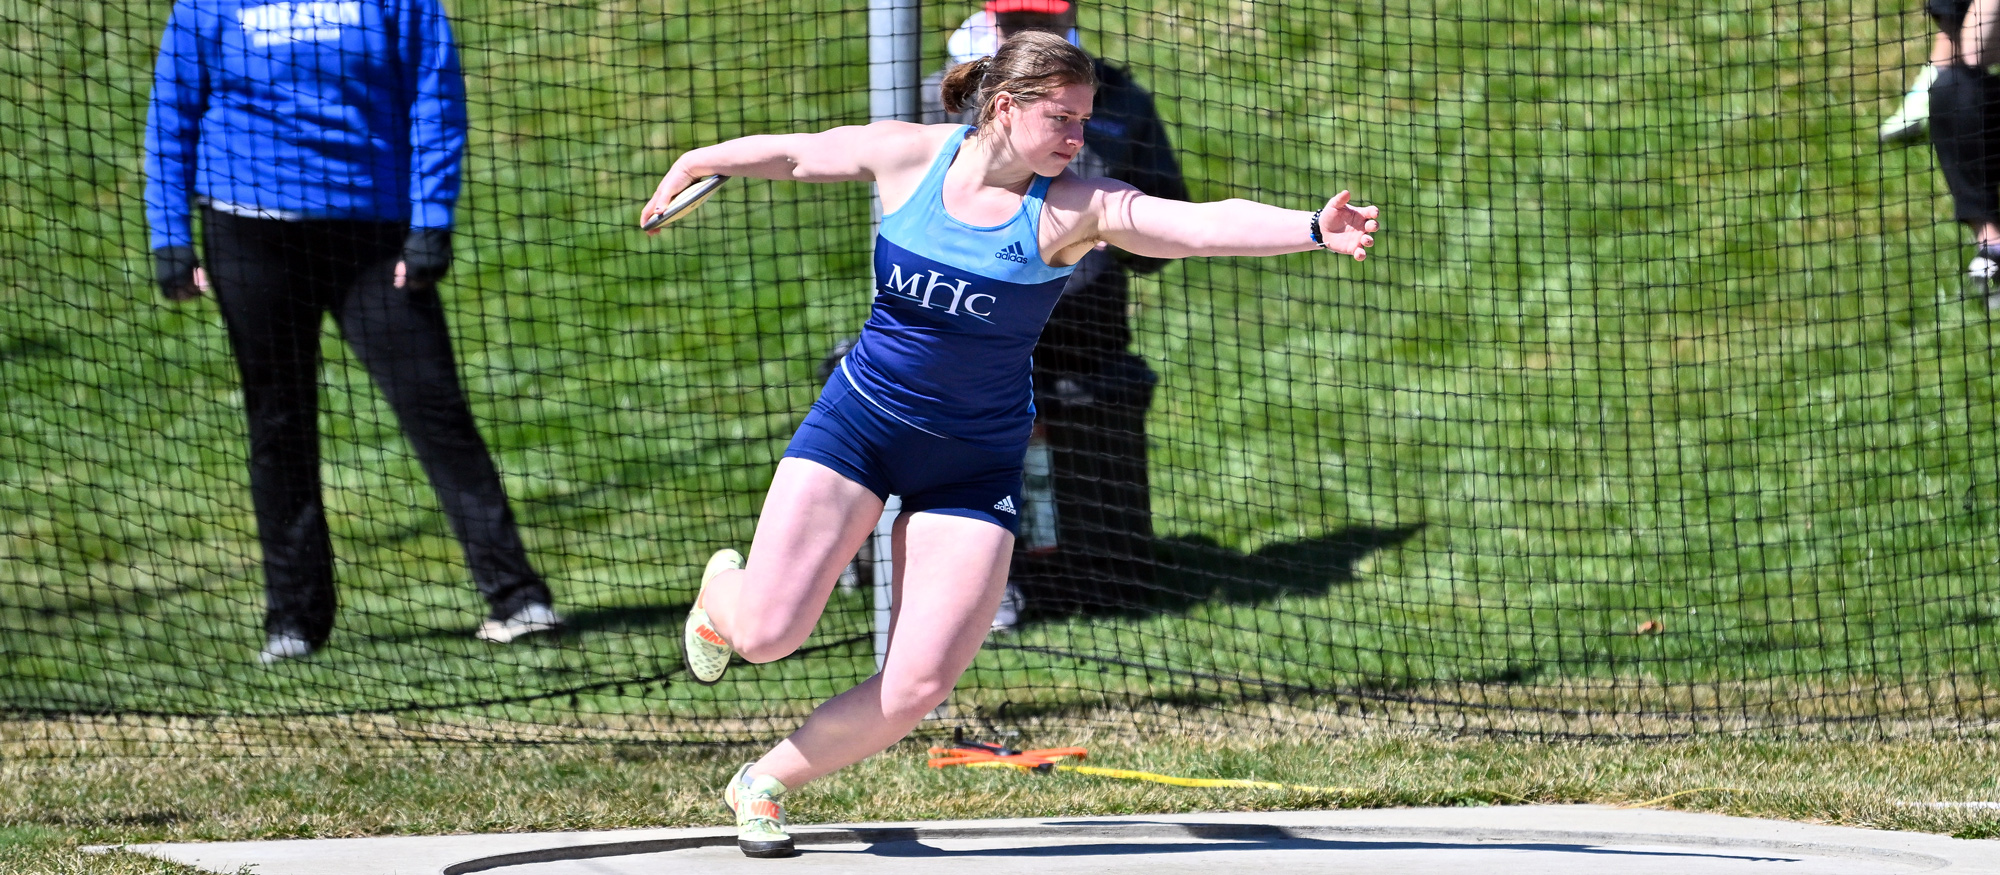 Emma Doyle placed 16th in the discus throw at the New England Division III Outdoor Championships at Springfield College on May 6, 2023. (RJB Sports file photo)